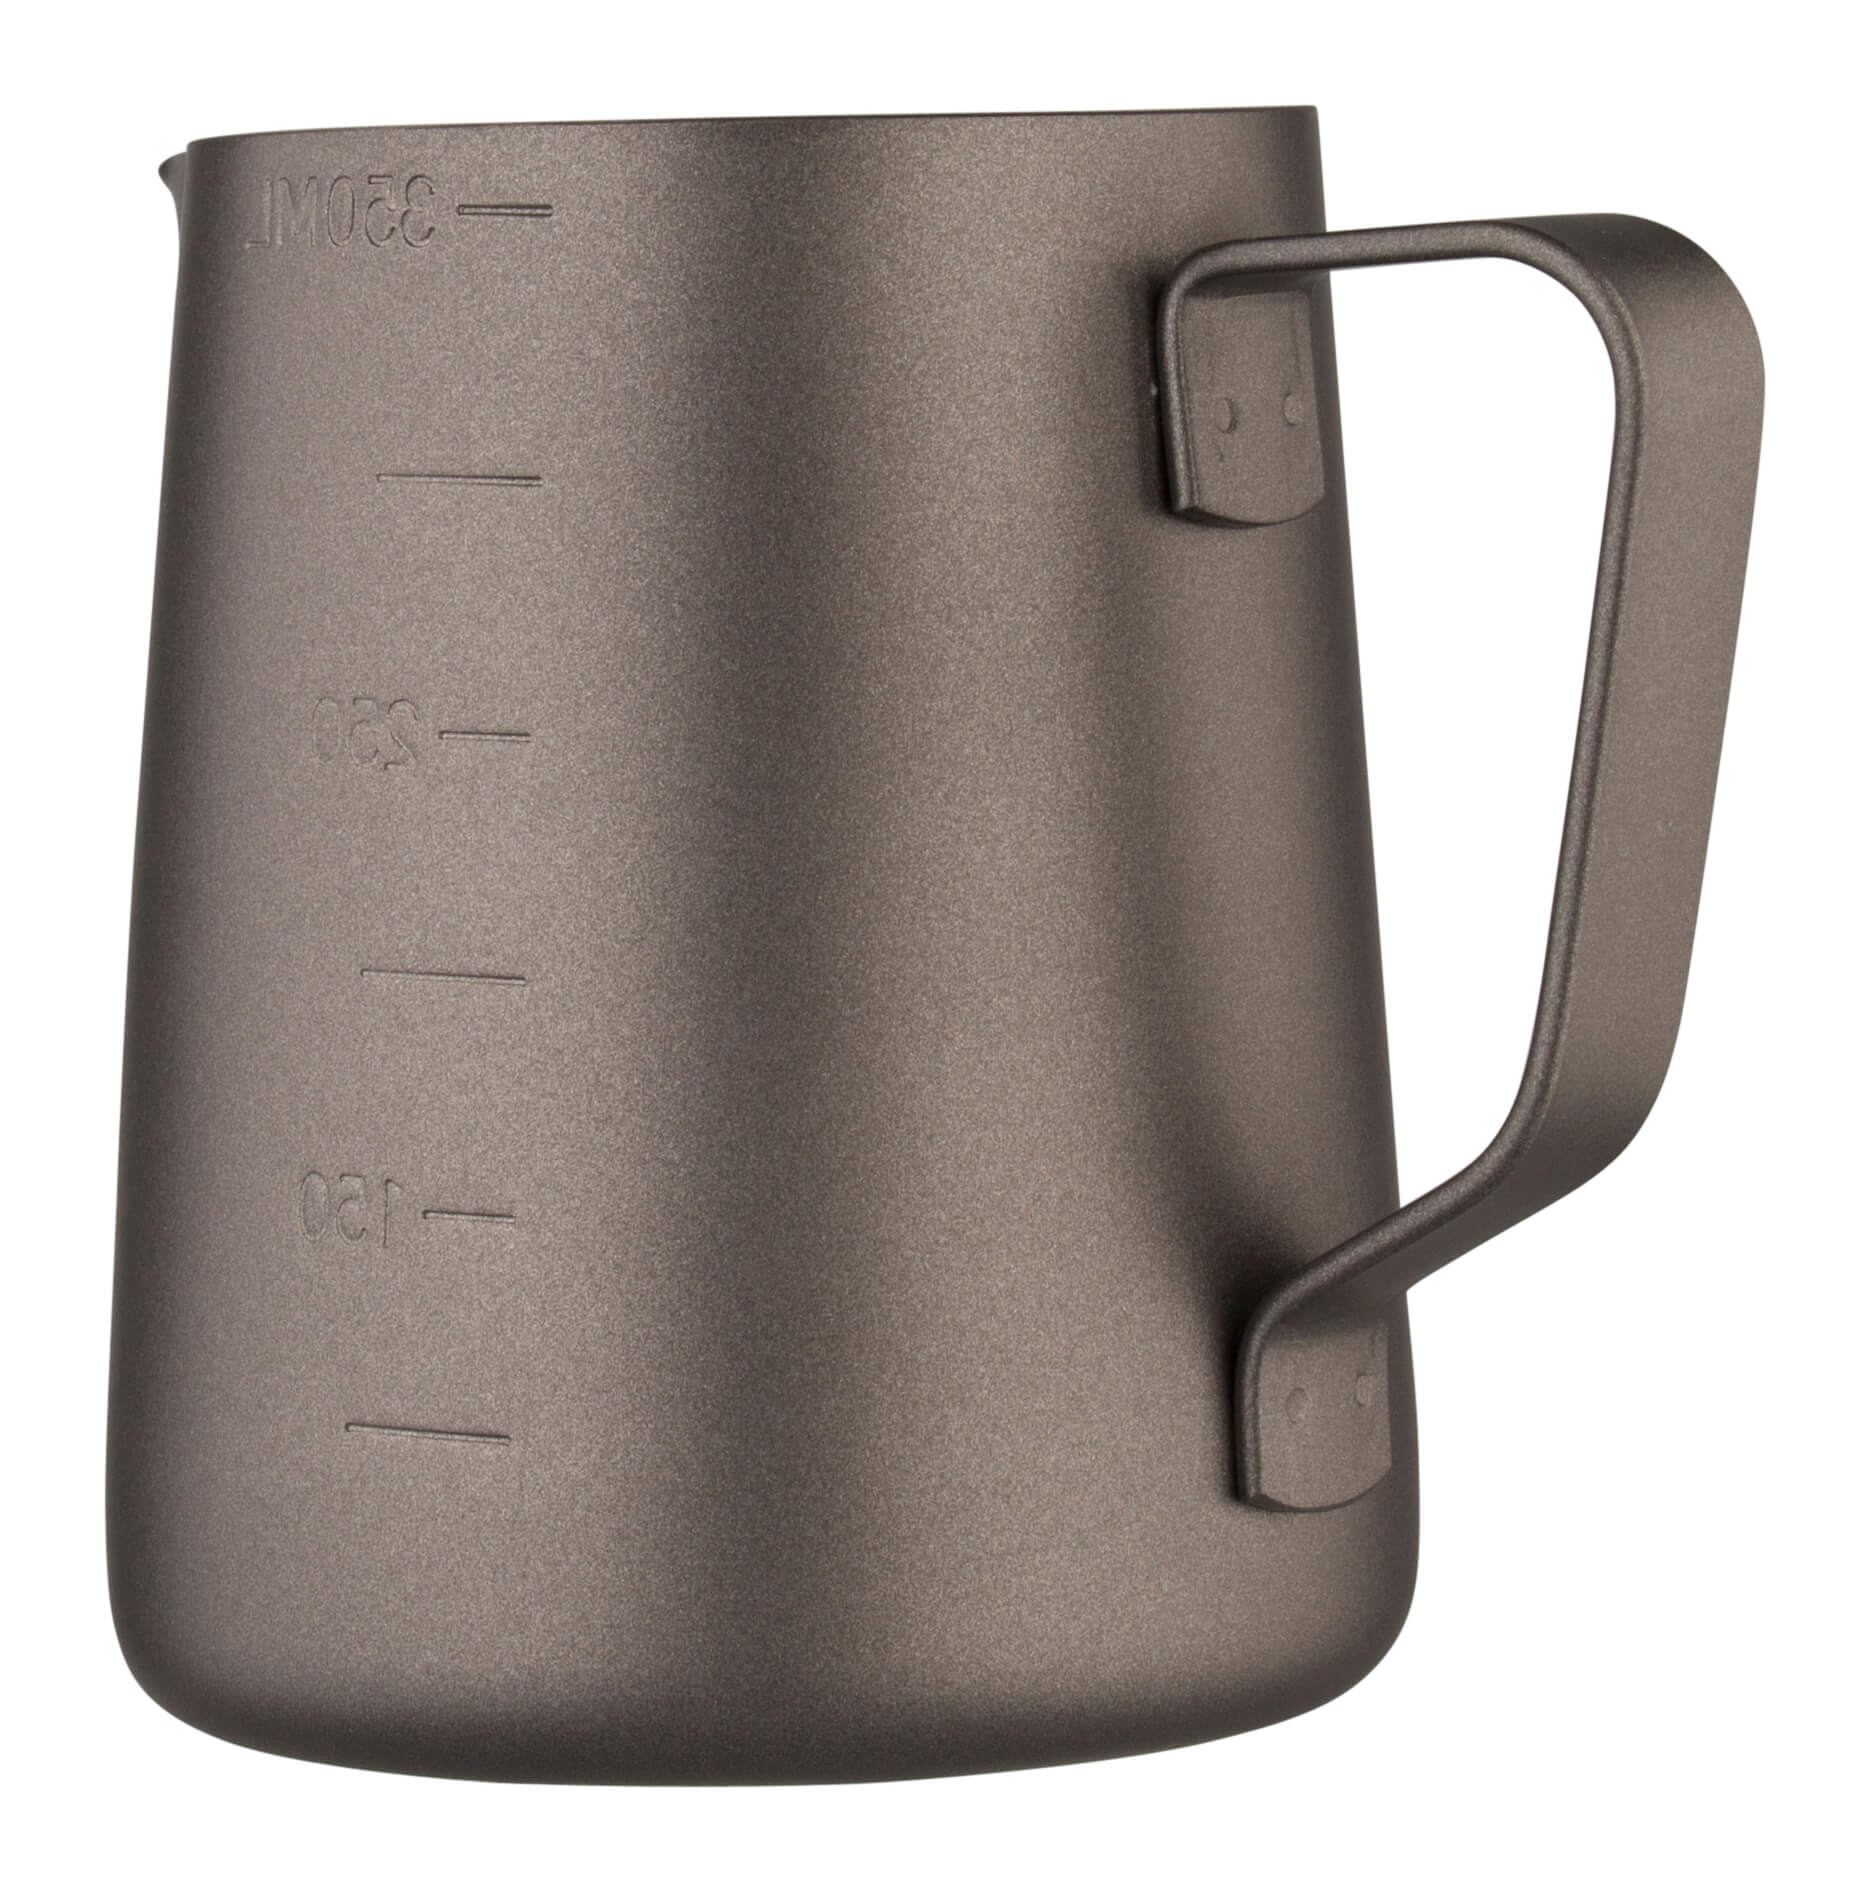 Milk Jug with scale, stainless steel - 350ml